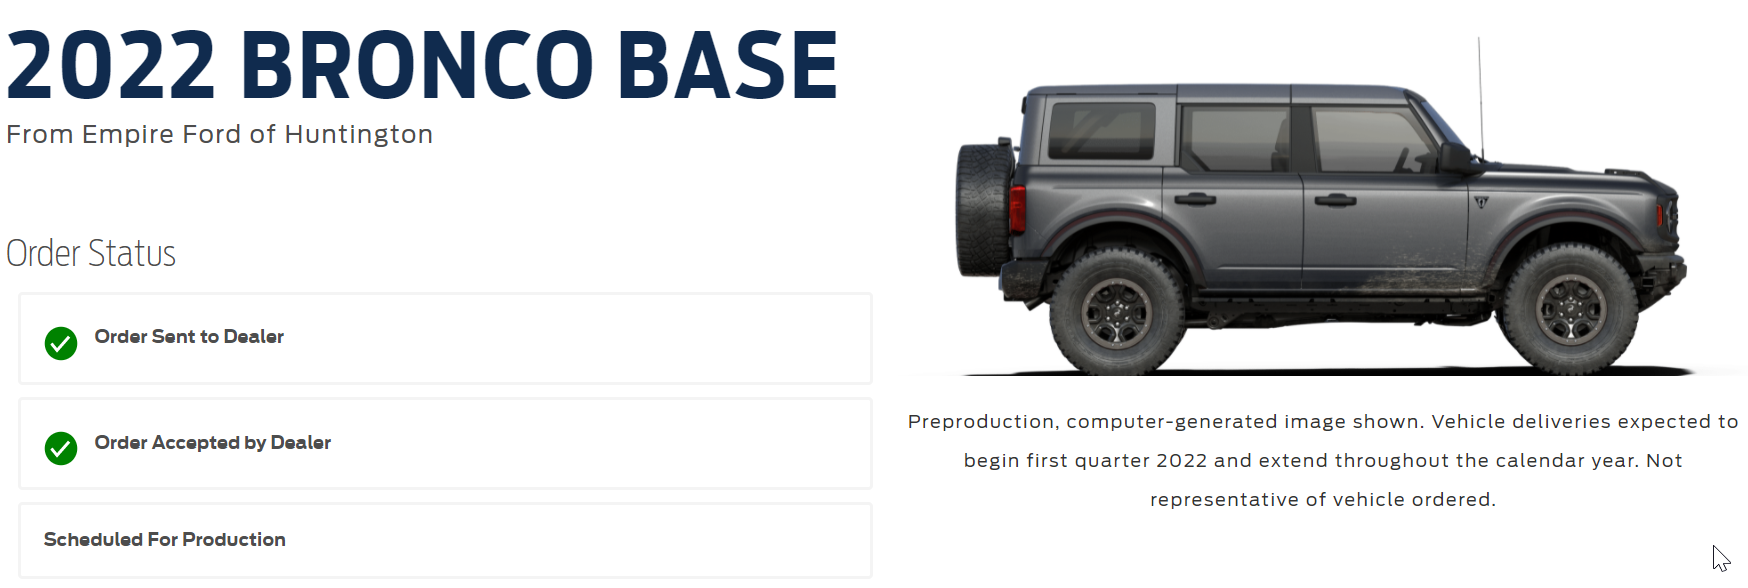 Ford Bronco Check your Bronco order status using back door link. Found out I'm In-Production without email received 1641821176987